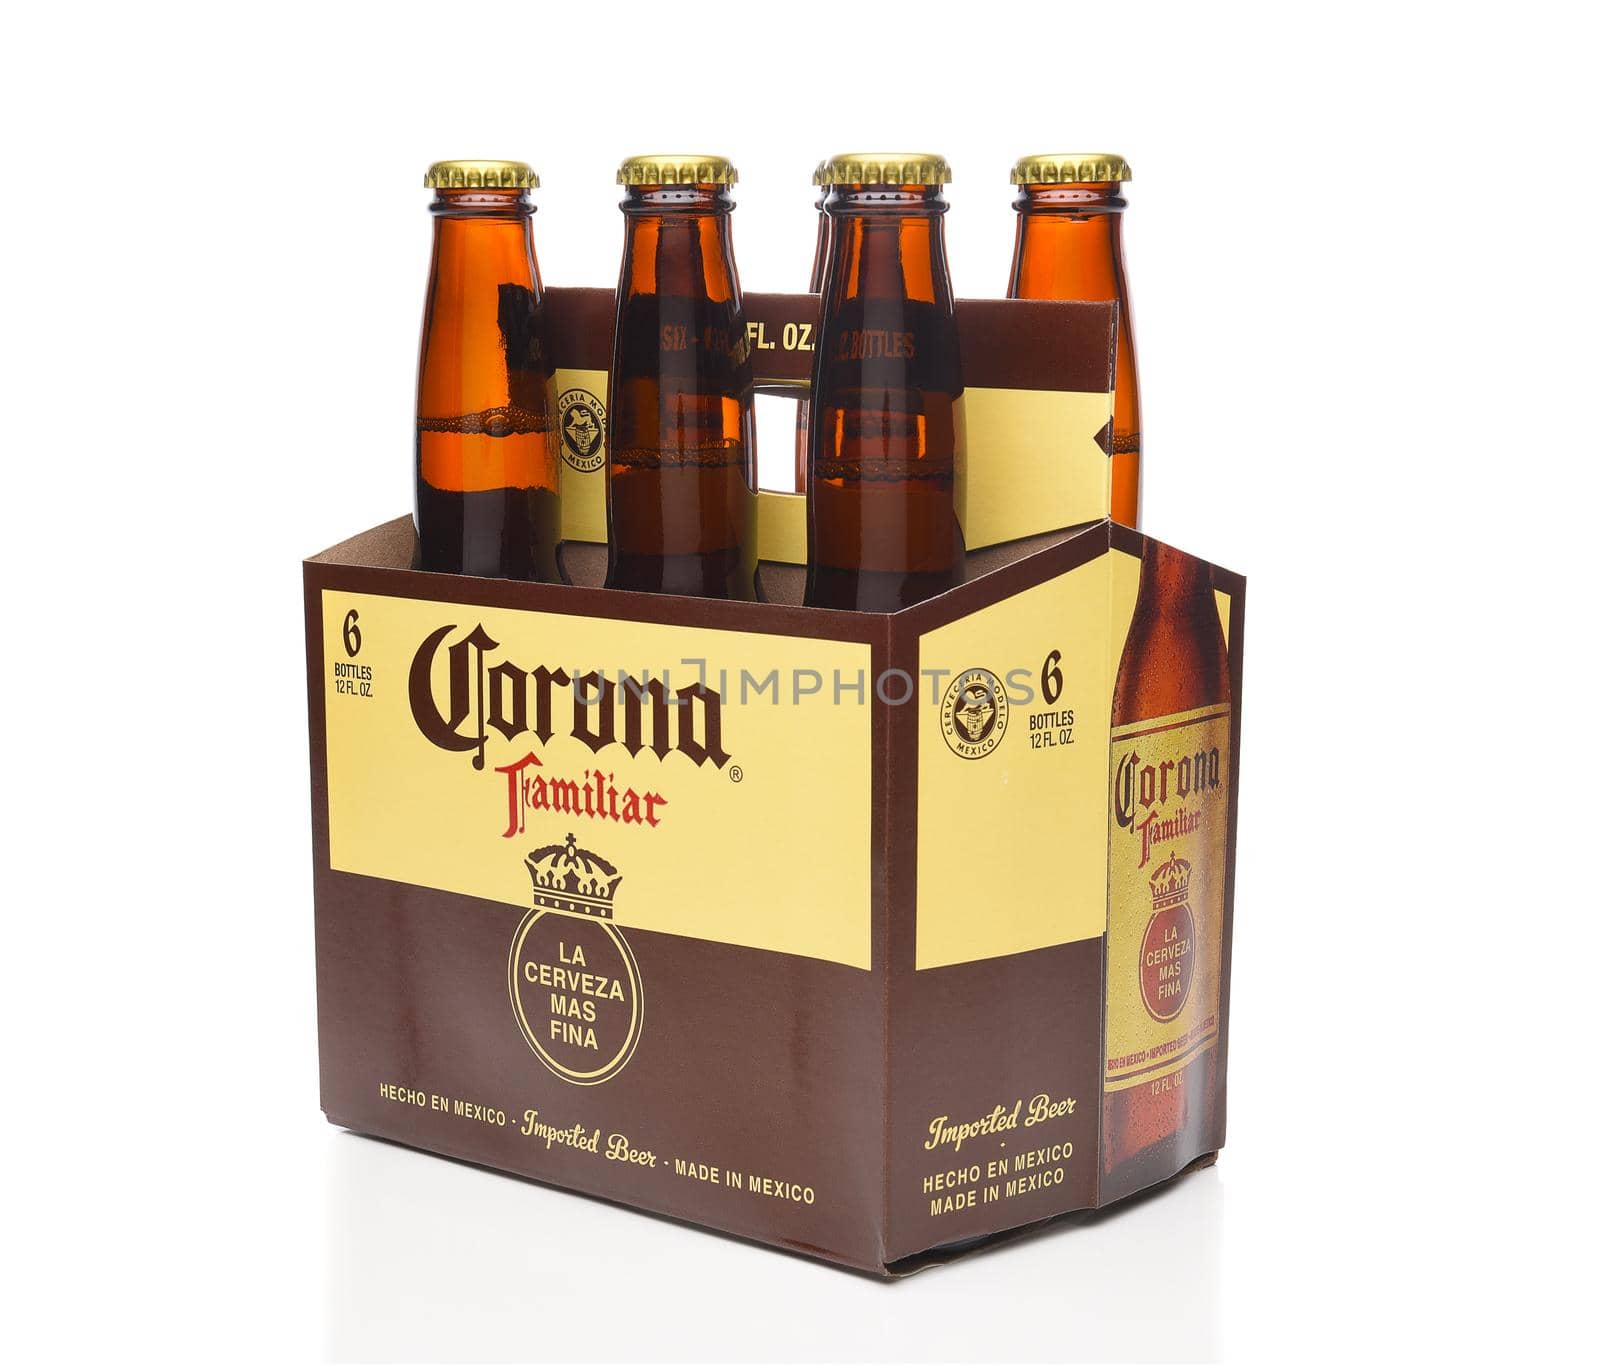 IRVINE, CALIFORNIA - MARCH 21, 2018: 6 pack of Corona Familiar beer side end view. Familiar tastes like Corona Extra, but with a richer flavor. 